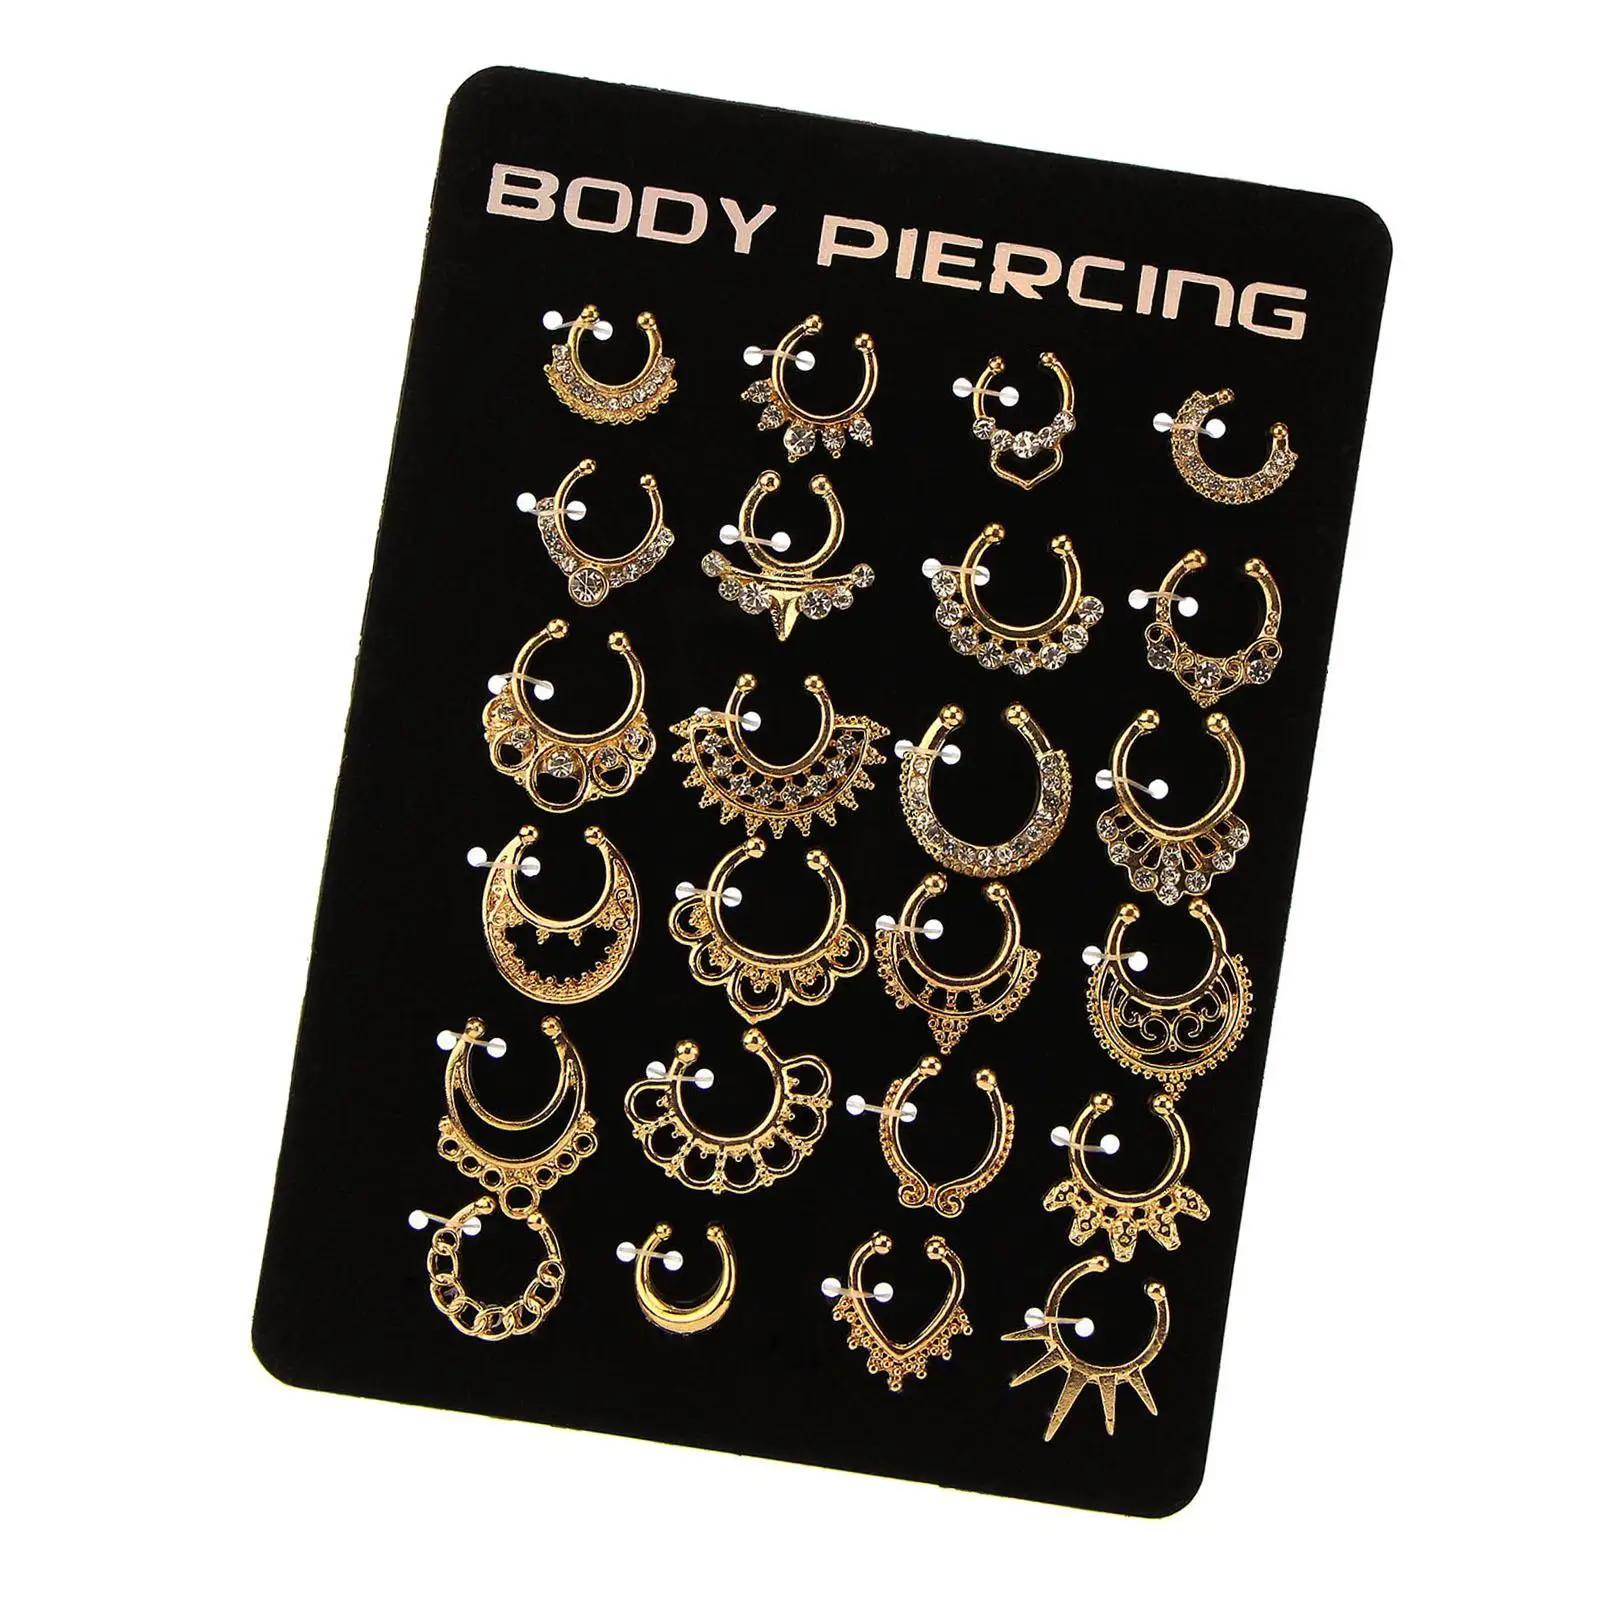 Fashion Nose Rings Set Faux Septum Hanger Clip Body Piercing Jewelry Mix Styles Nose Piercing Jewelry for Adults Girls Boys